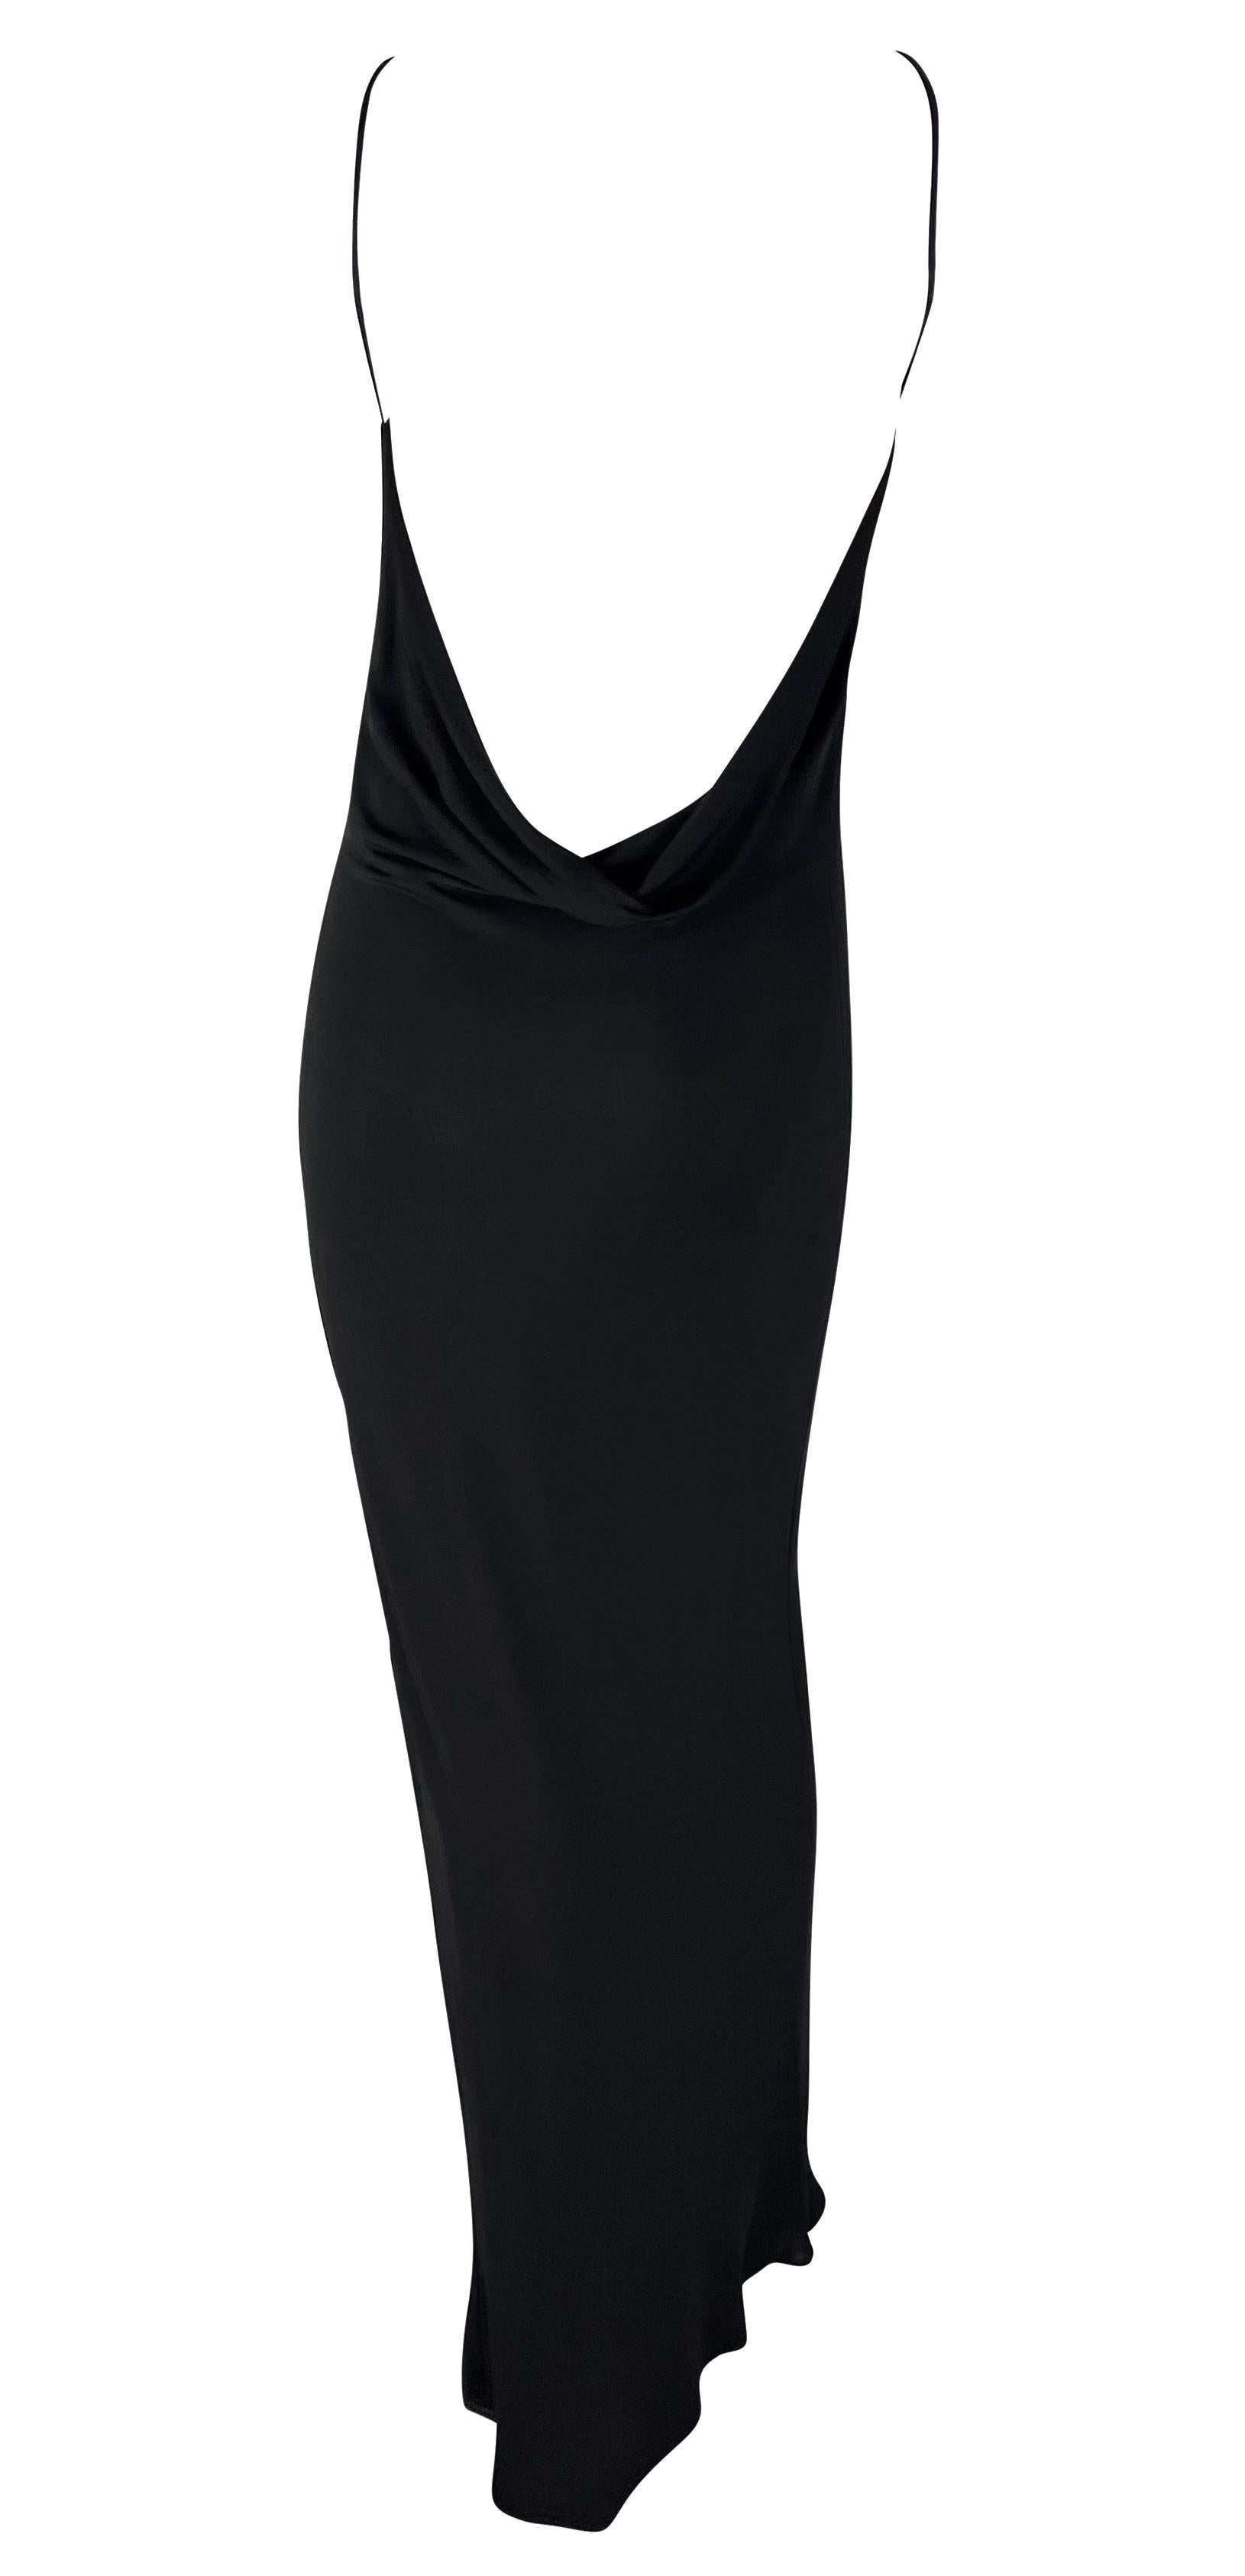 This backless black gown by Israeli-American designer Yigal Azrouël, dating back to the late 1990s, epitomizes versatility. Whether for a formal occasion or a more casual event, this chic gown fits the bill. It boasts a high, wide neckline and a